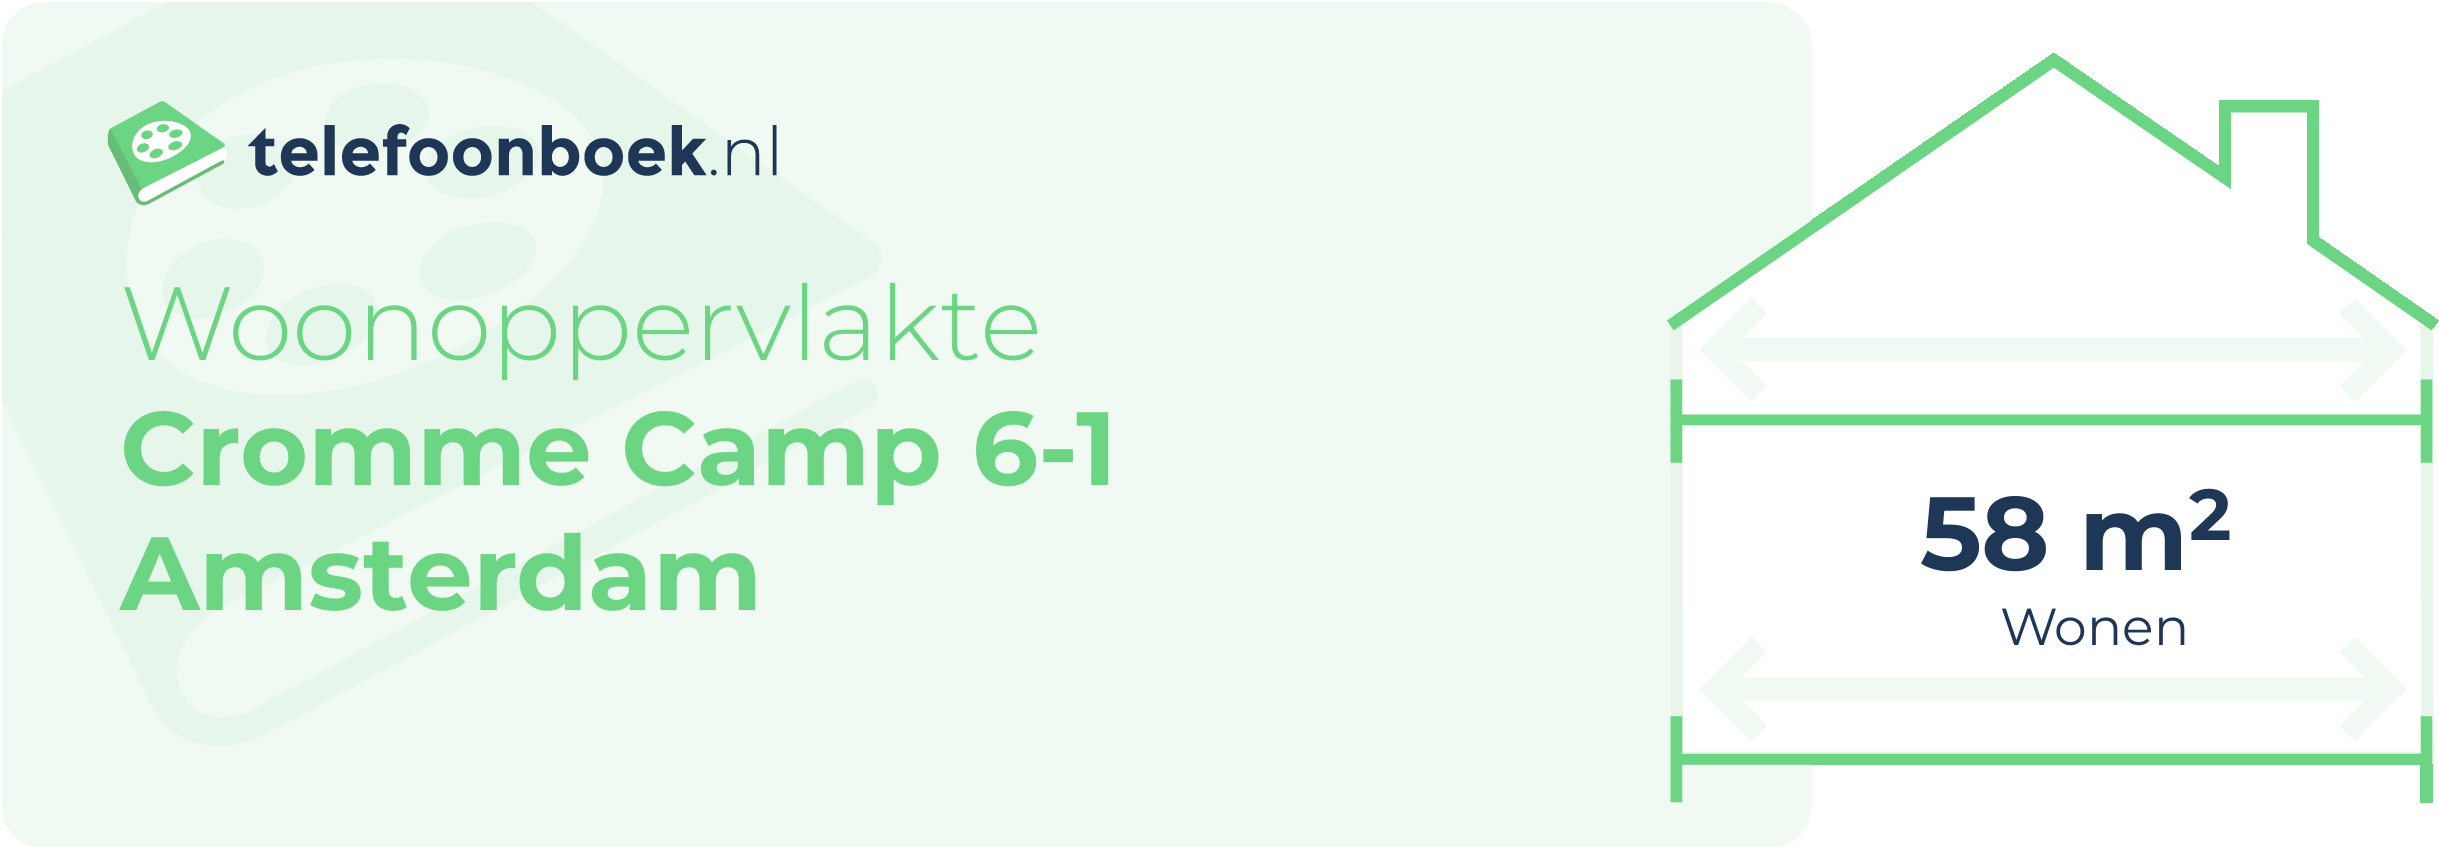 Woonoppervlakte Cromme Camp 6-1 Amsterdam